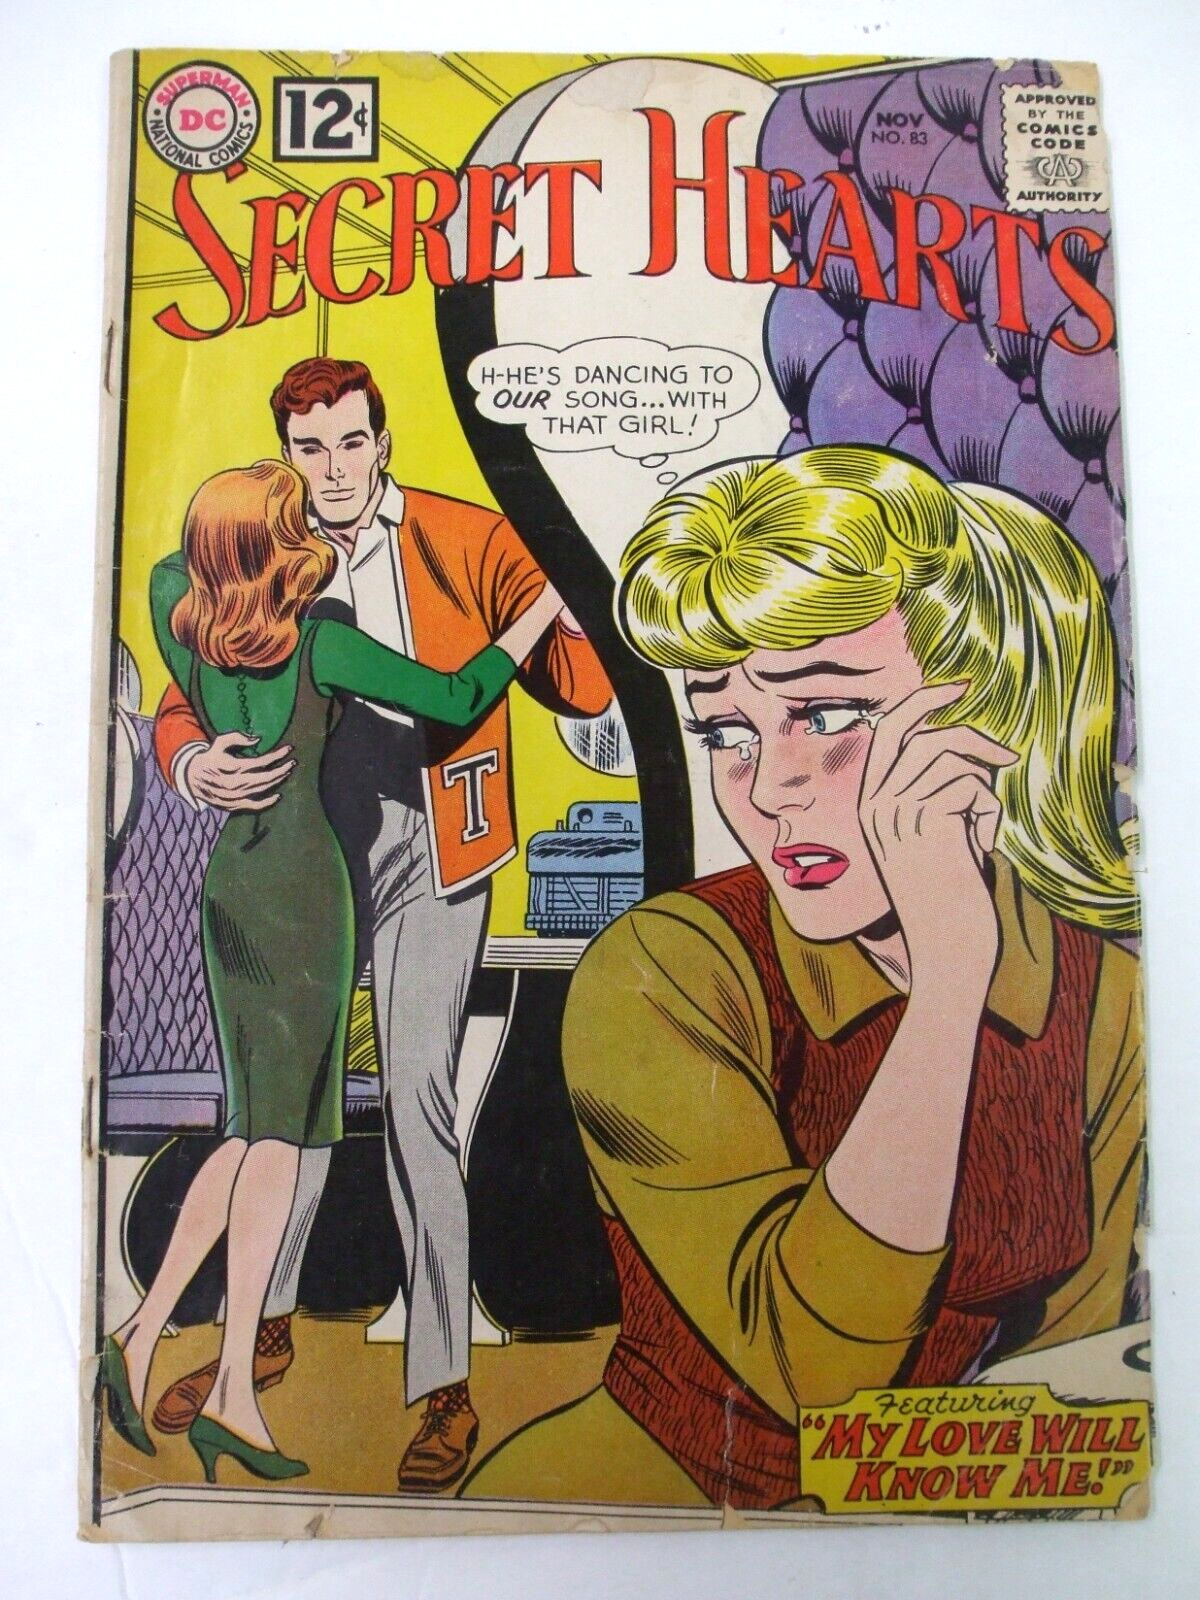 DC Comics “Secret Hearts” #83 From 1962 - Acceptable - Shows Wear But Complete